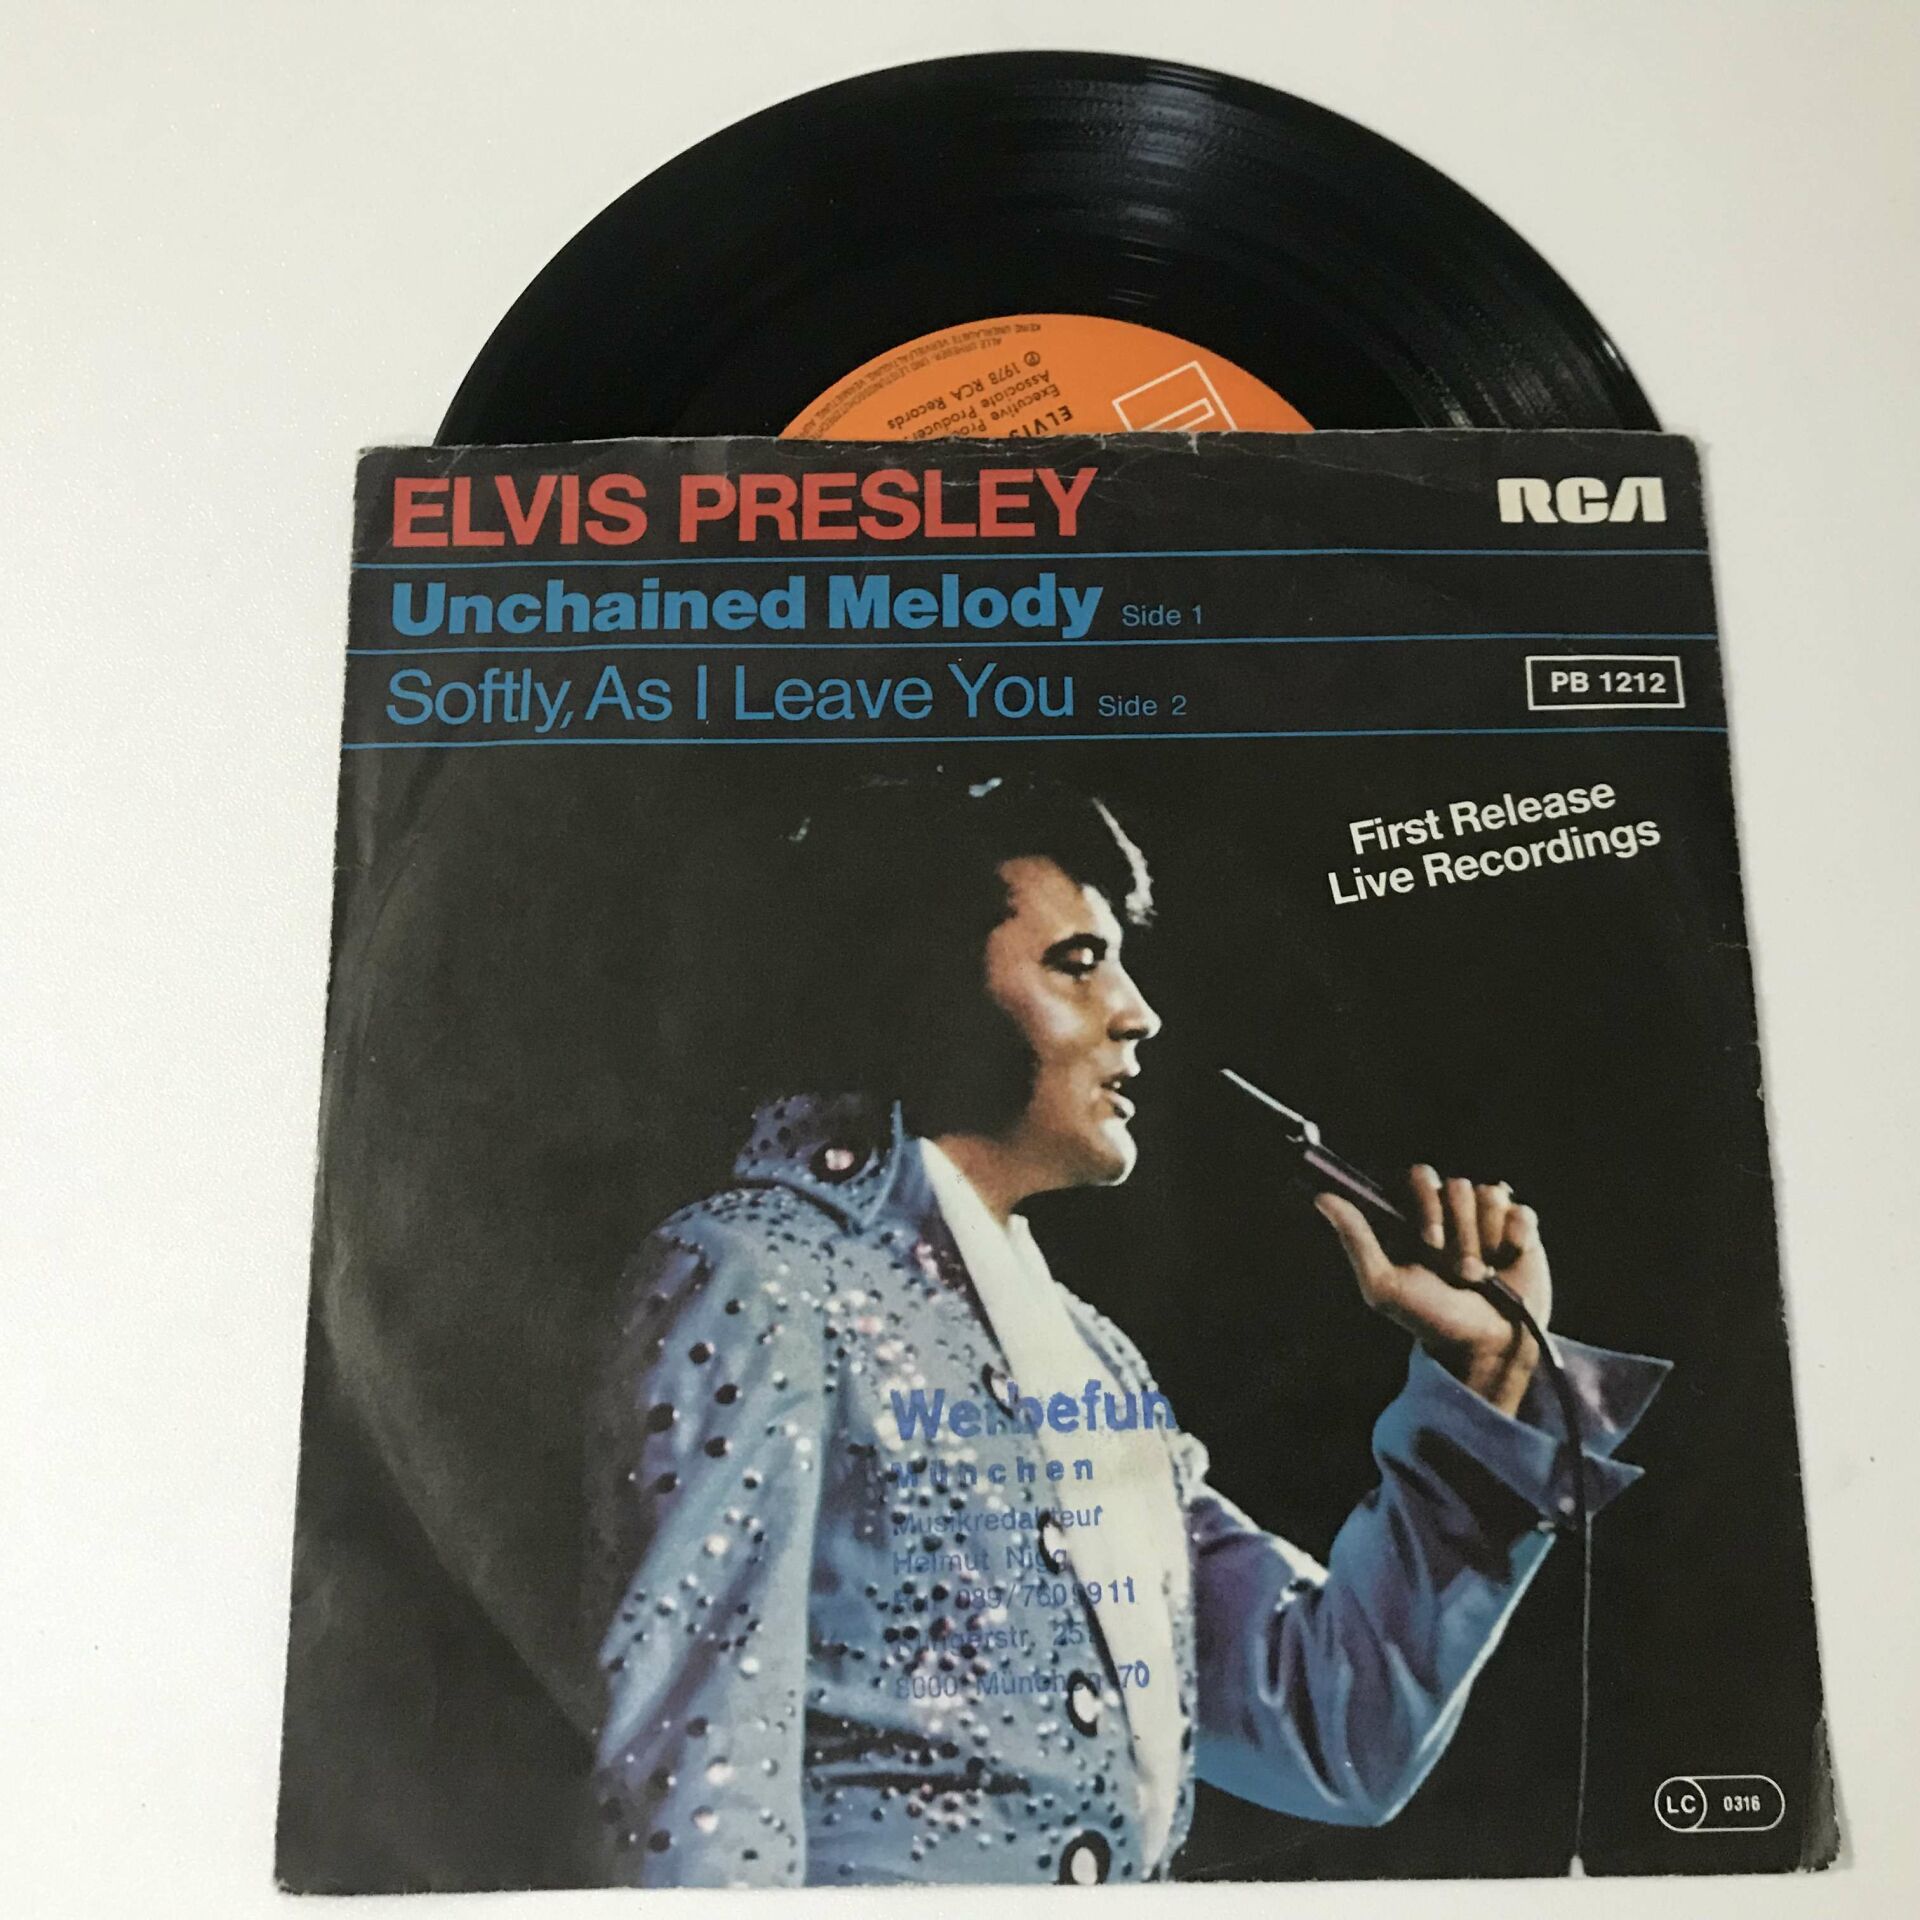 Elvis Presley – Unchained Melody